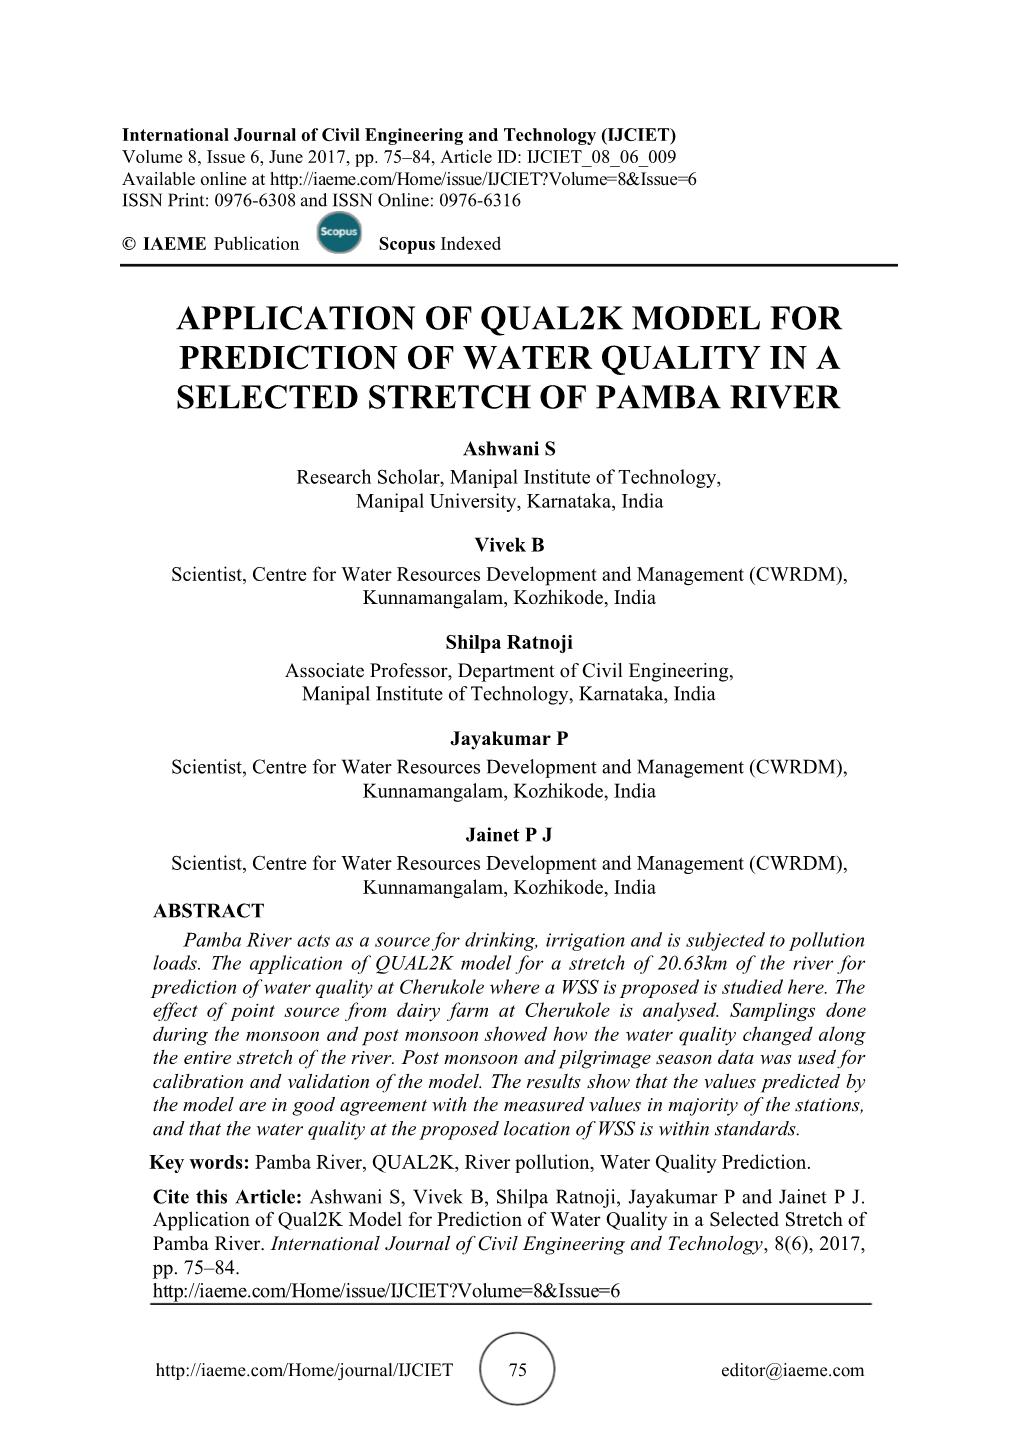 Application of Qual2k Model for Prediction of Water Quality in a Selected Stretch of Pamba River